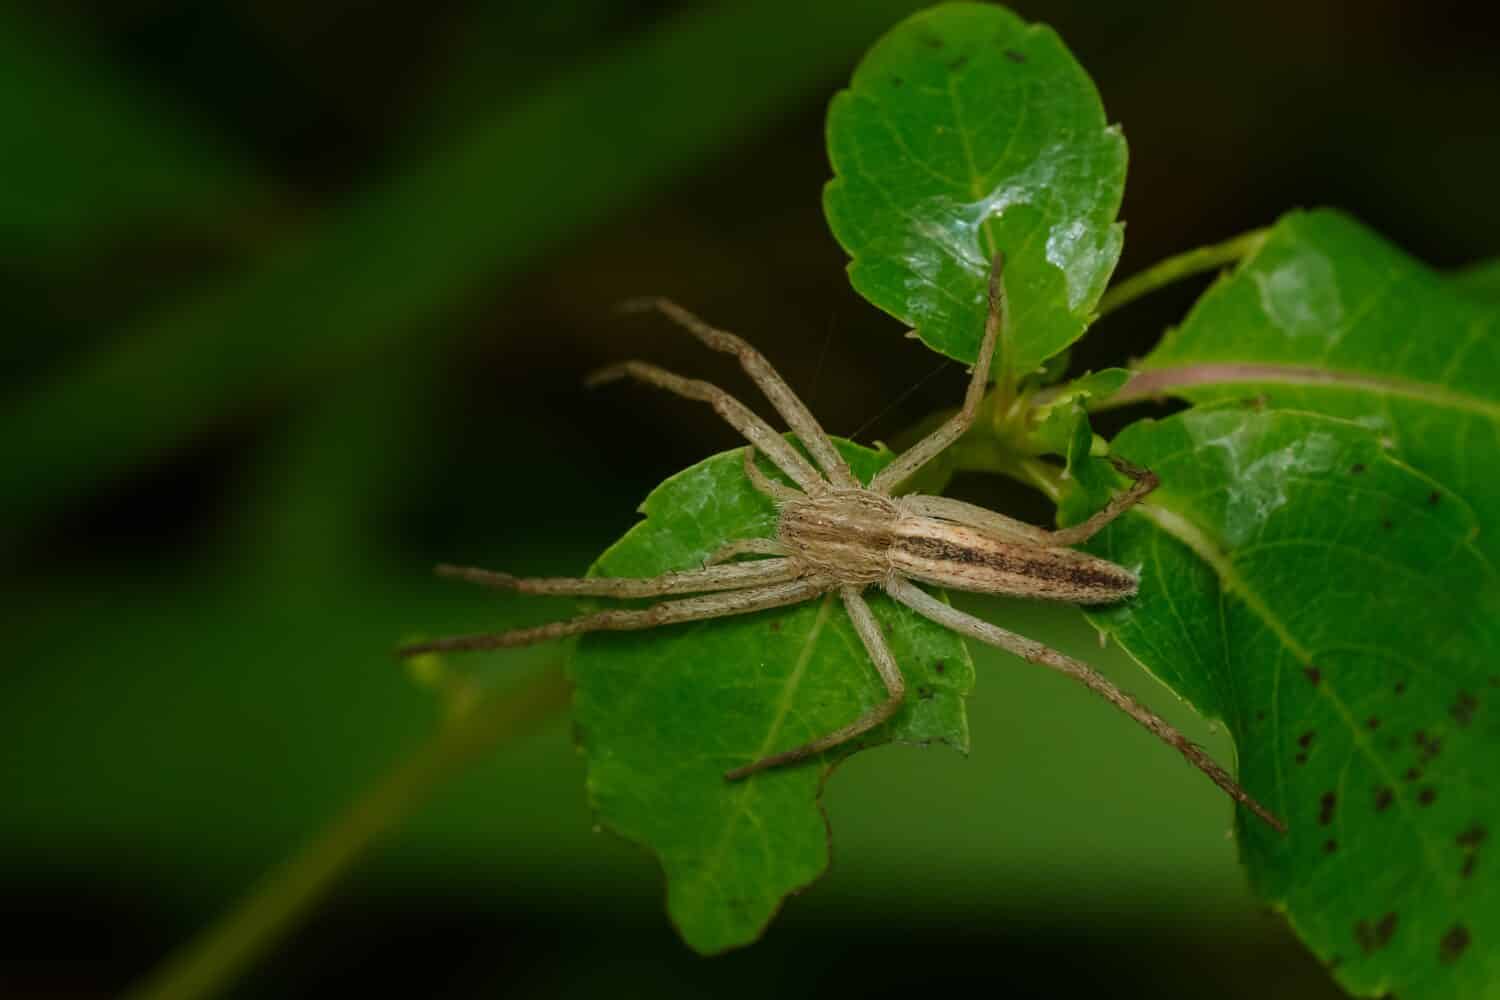 An Oblong Running Spider is resting on a green leaf. Taylor Creek Park, Toronto, Ontario, Canada.